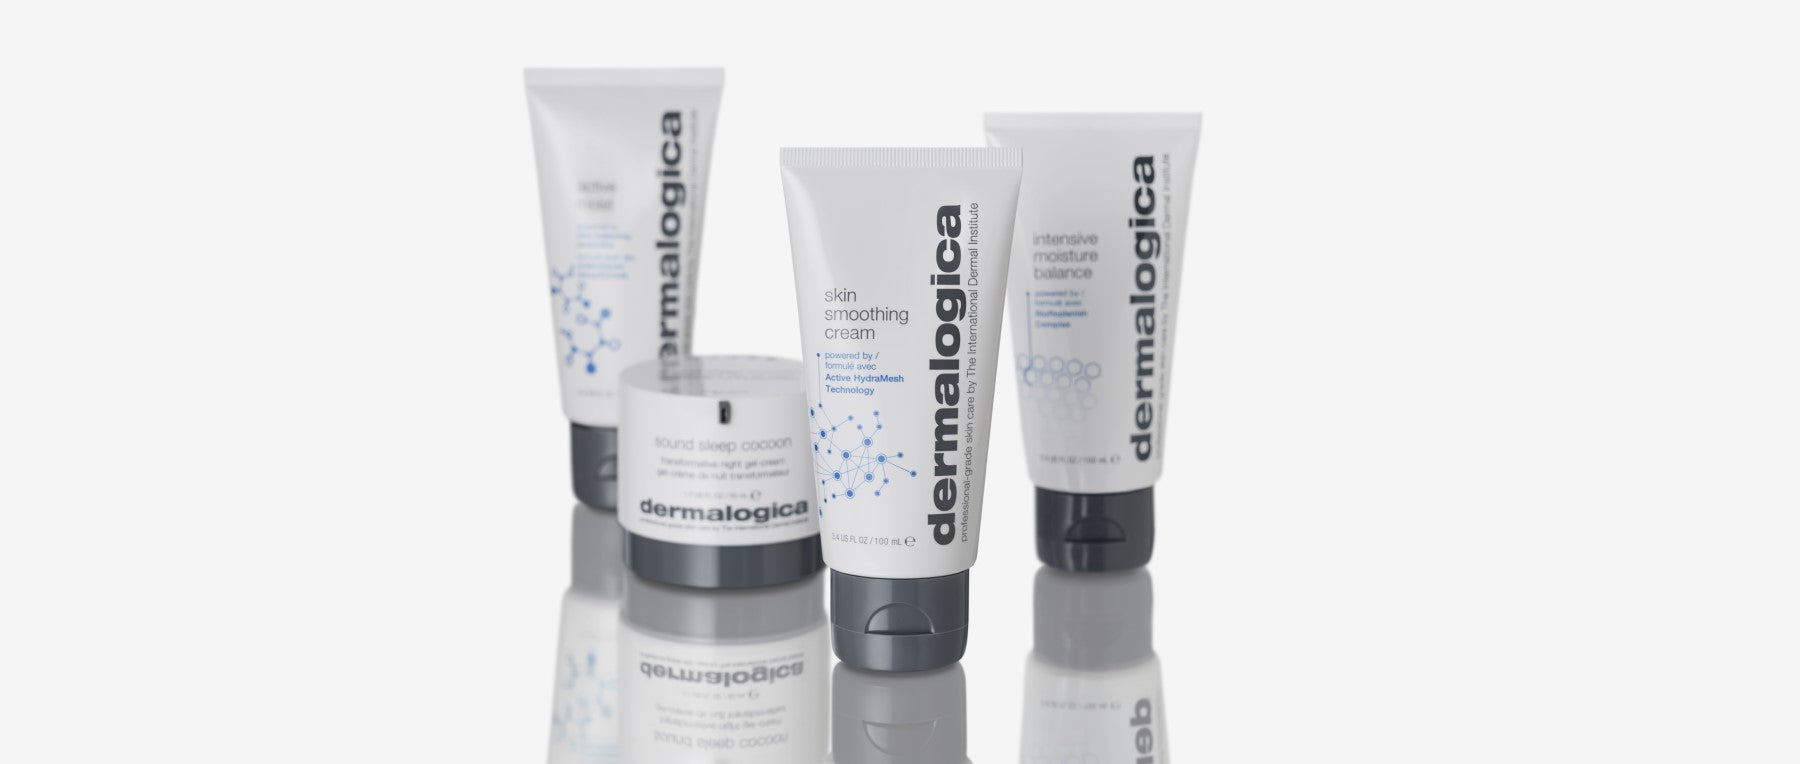 here’s the moisturizer for your skin – Dermalogica CA